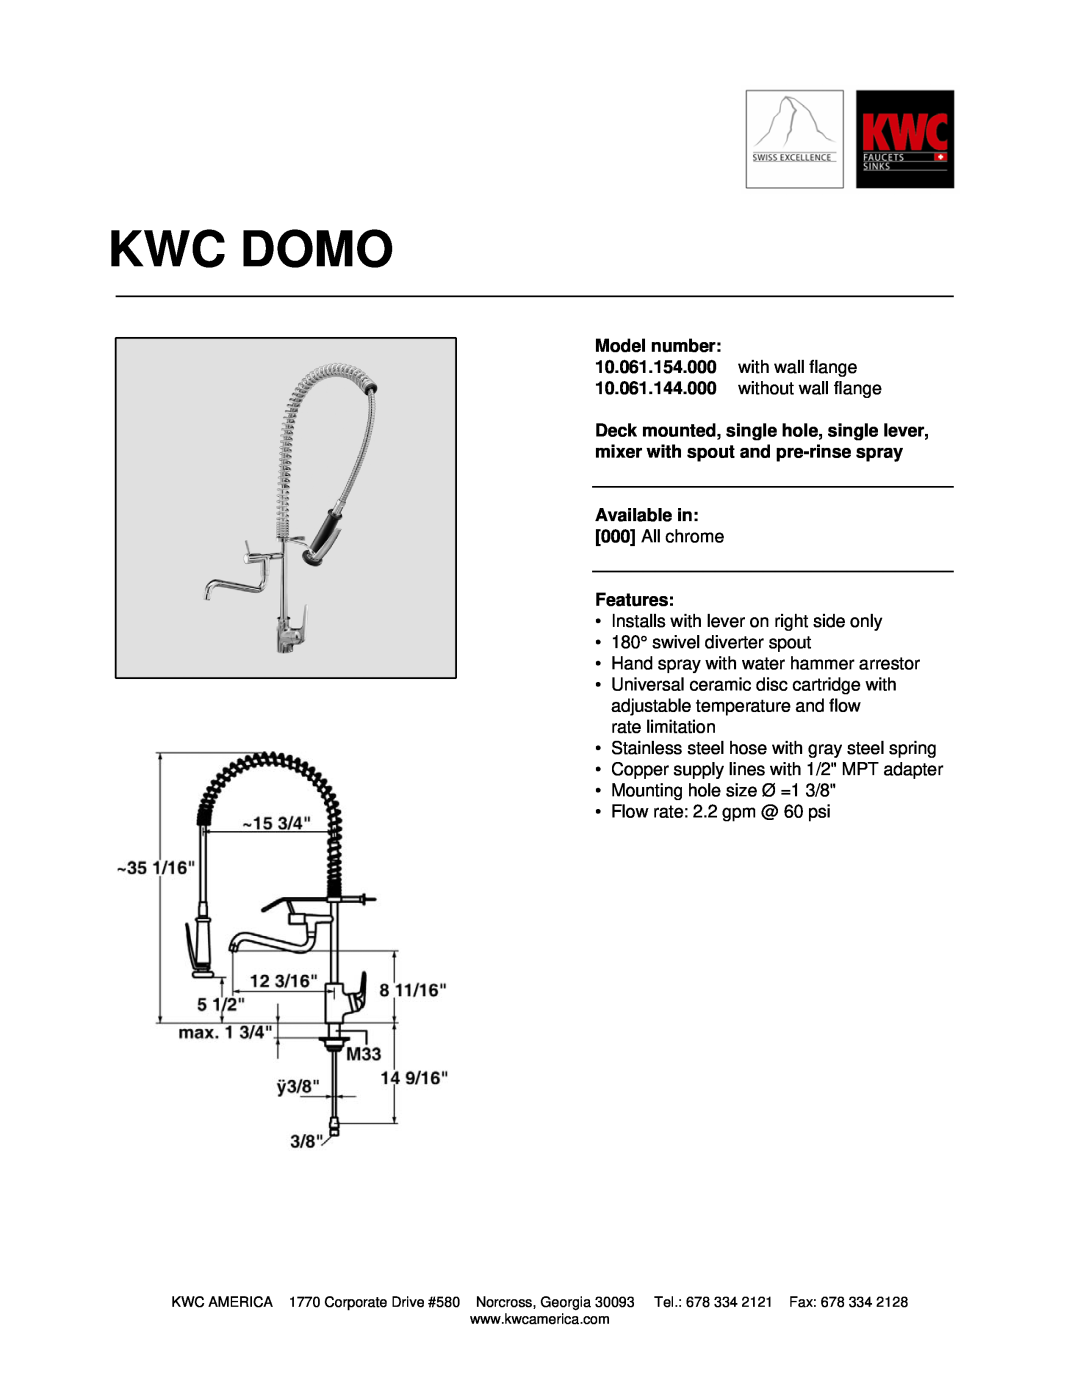 KWC 10.061.144.000, 10.061.154.000 manual Kwc Domo, Model number, Available in, Features 